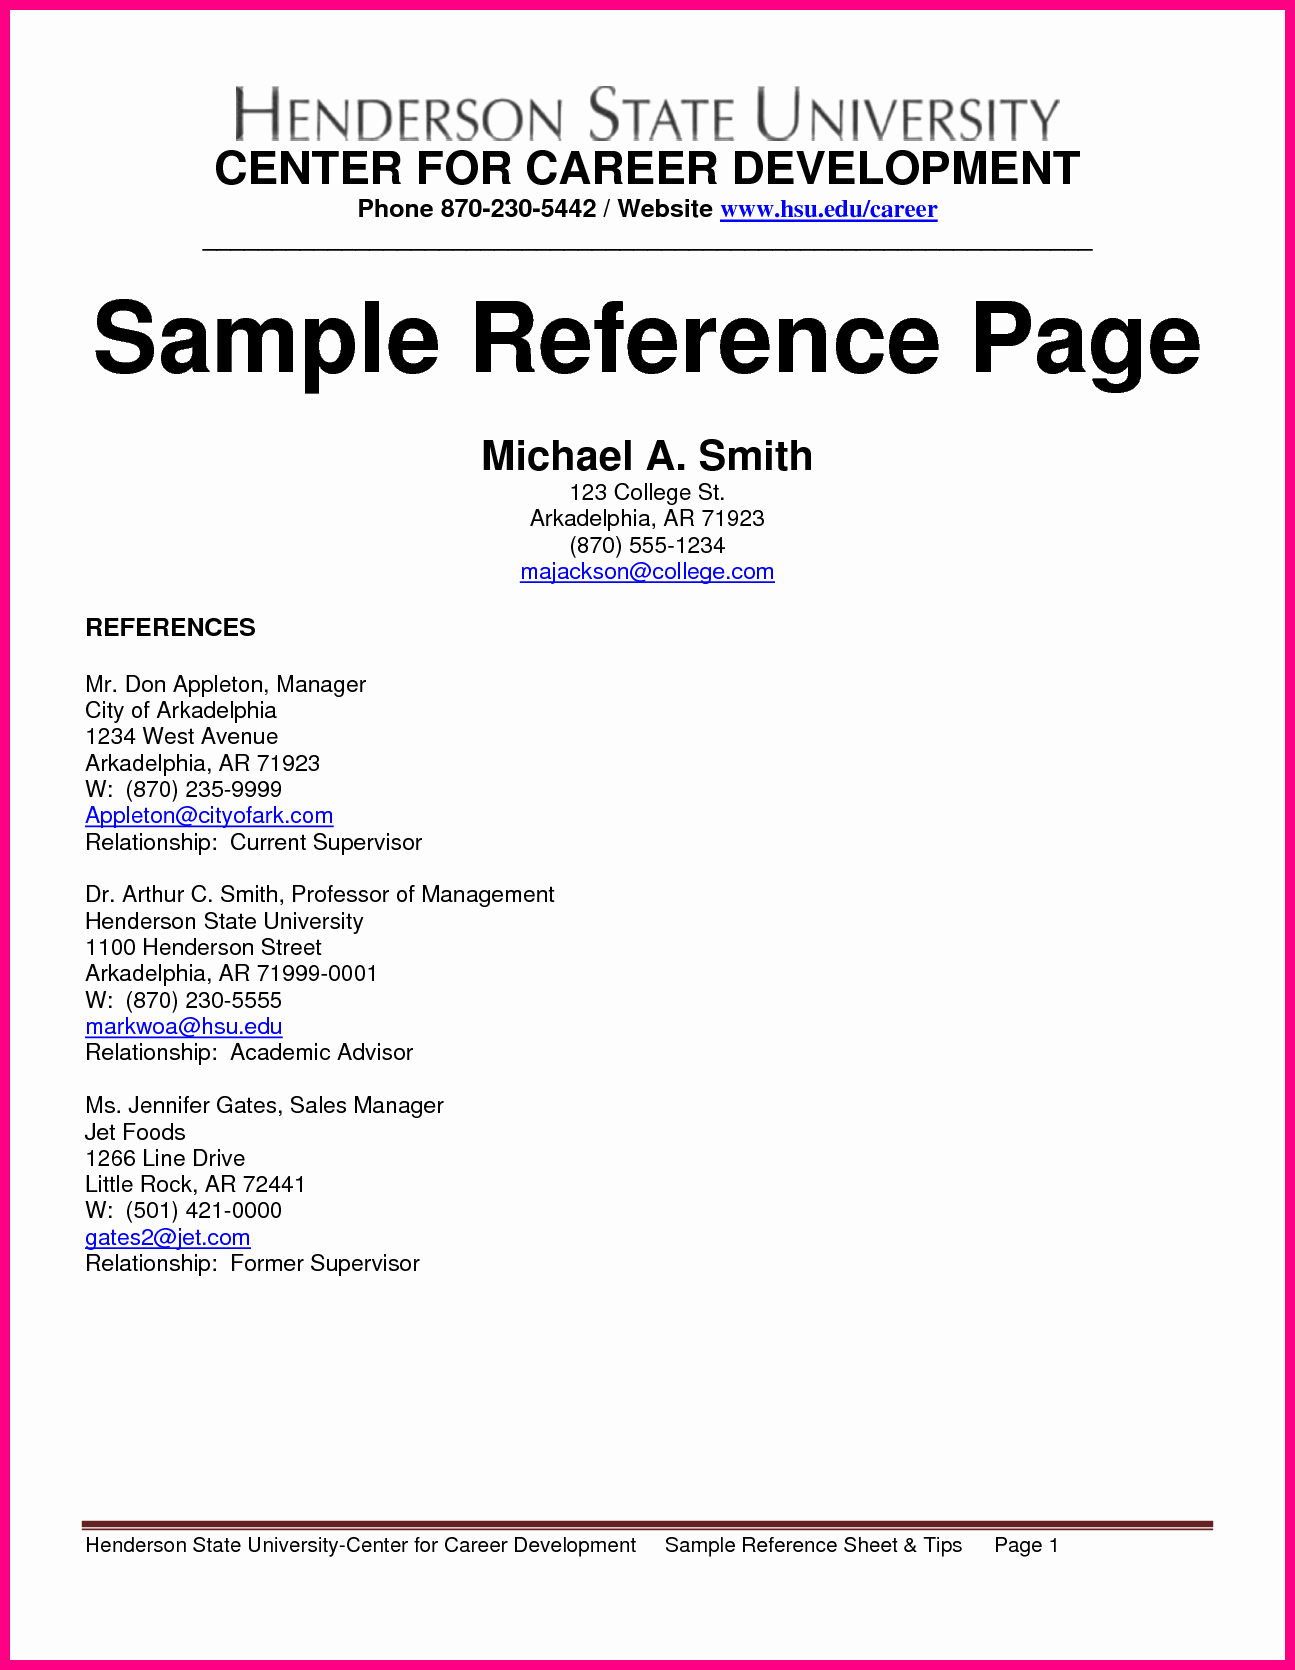 Sample Reference Sheet for Resume Elegant Reference Page Example